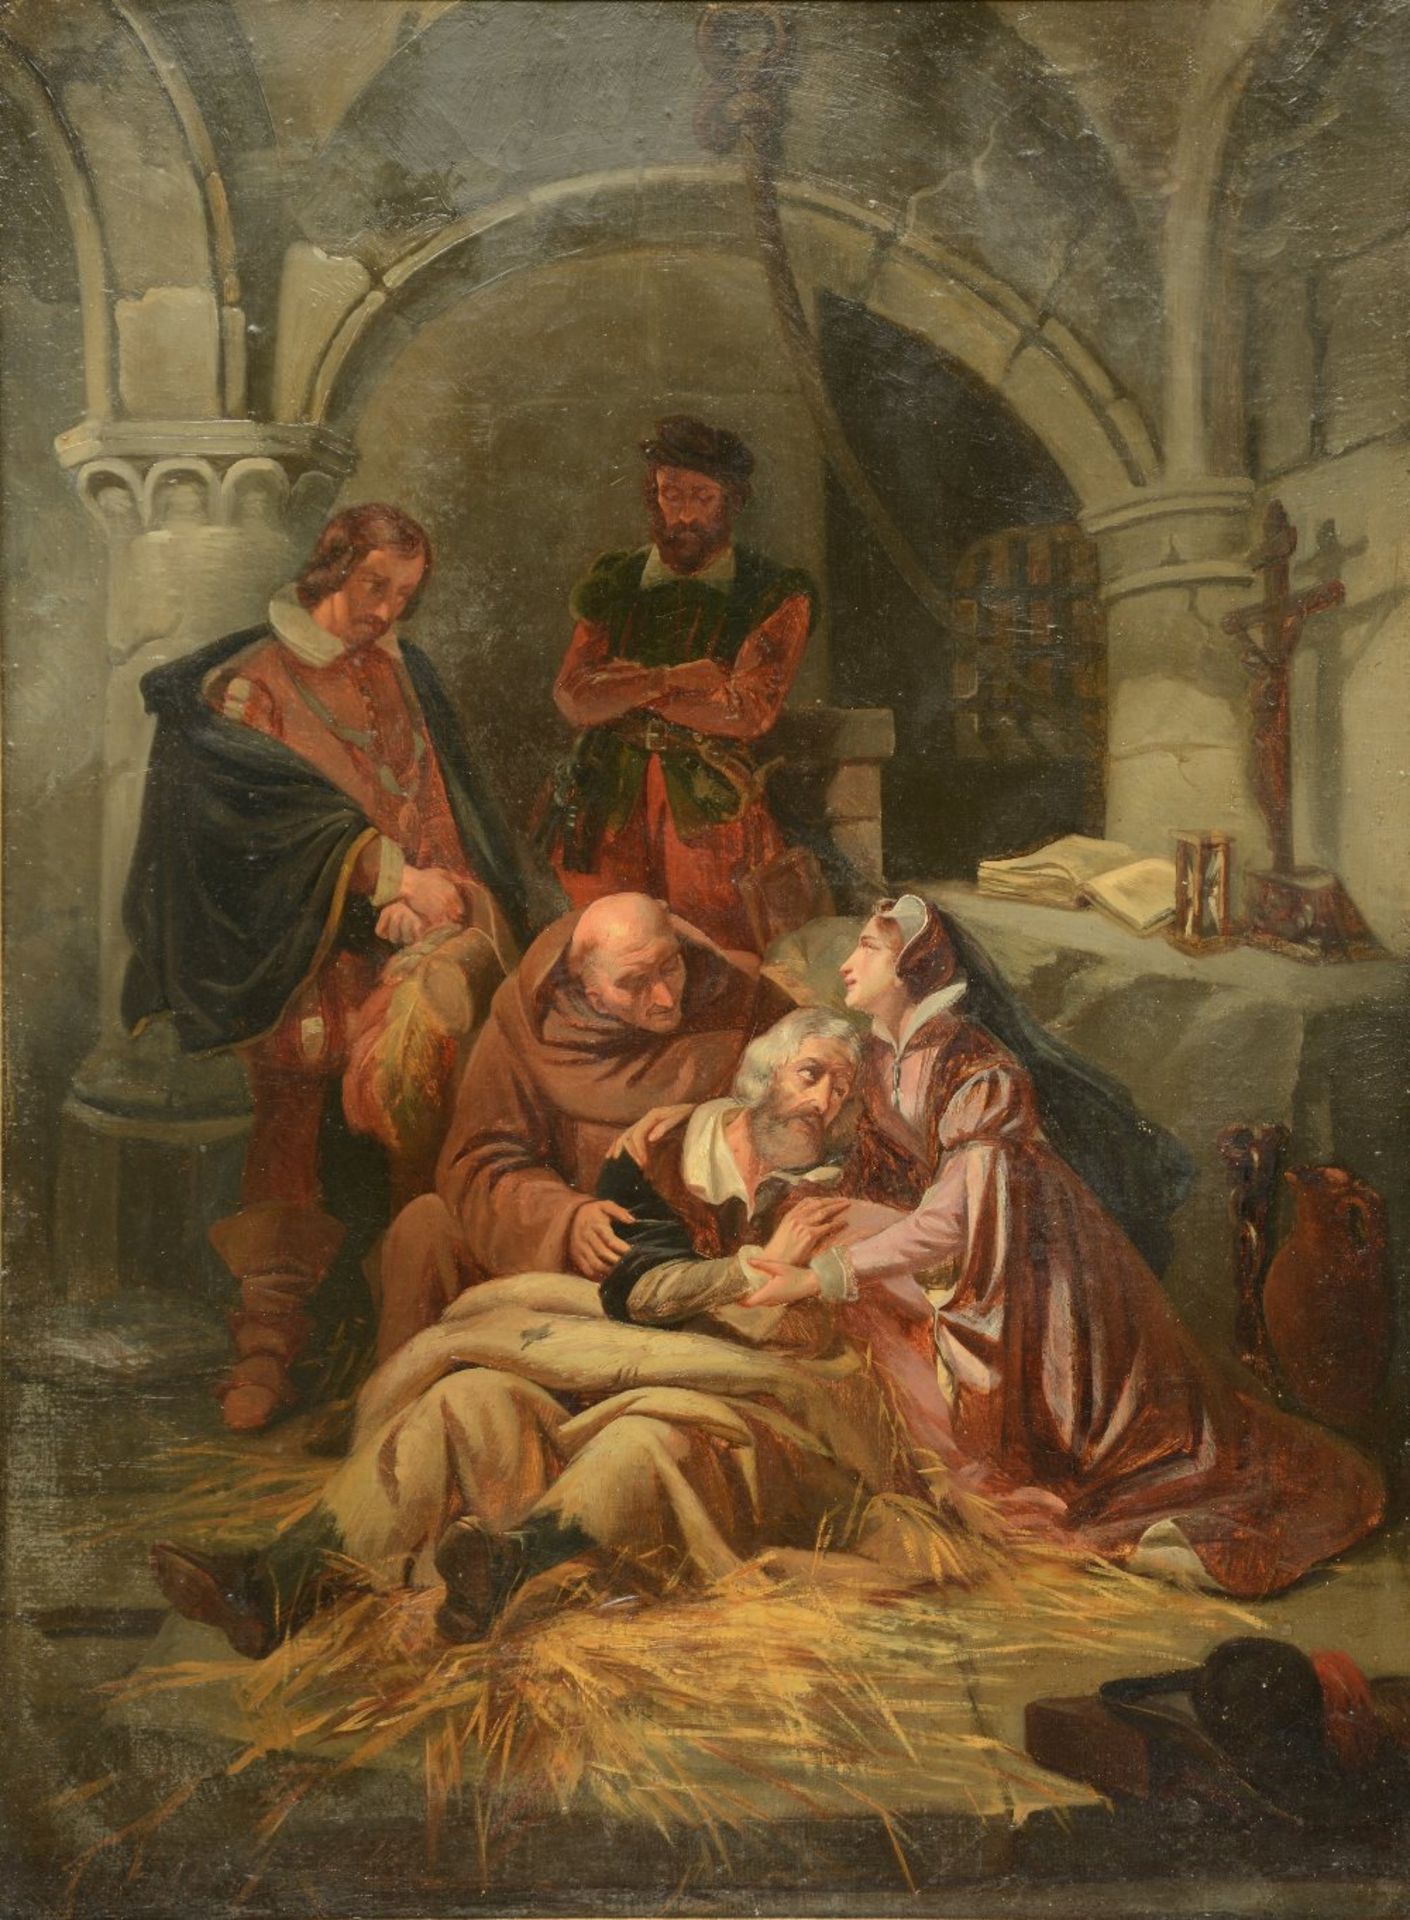 Unsigned, historical animated scene, oil on canvas, 19thC, 49 x 66 cm